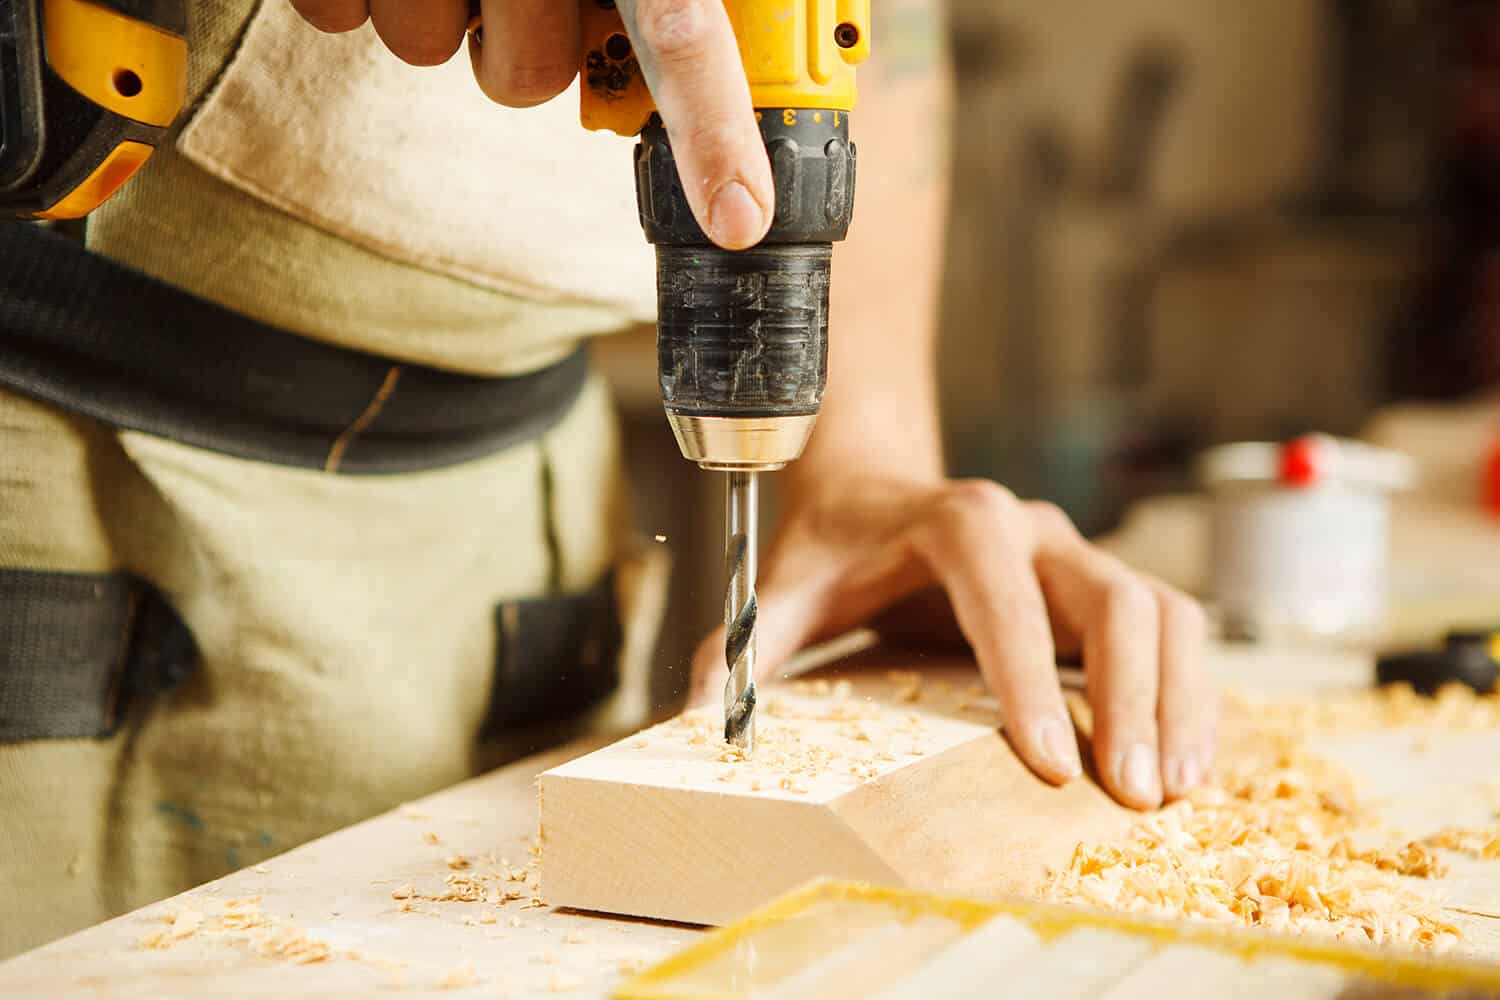 When Not to Use an Impact Driver